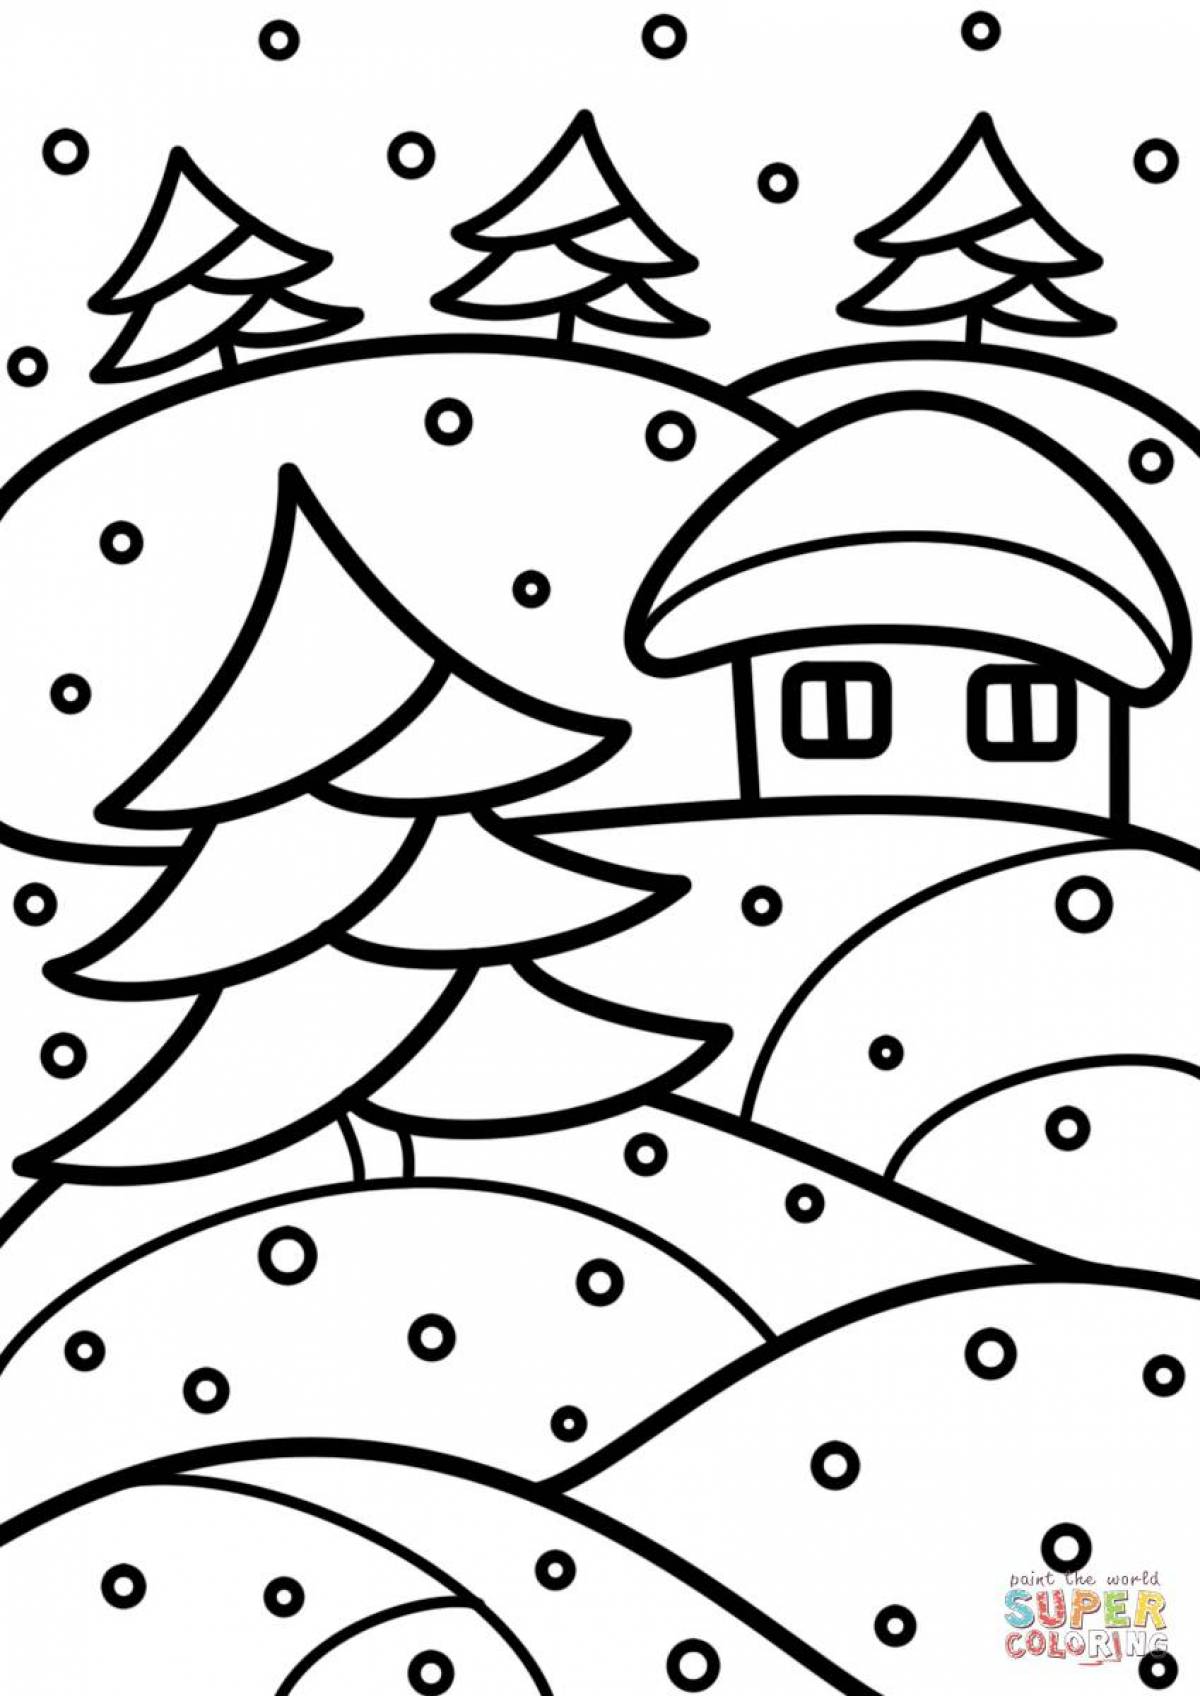 Colourful winter coloring book for children 4-5 years old